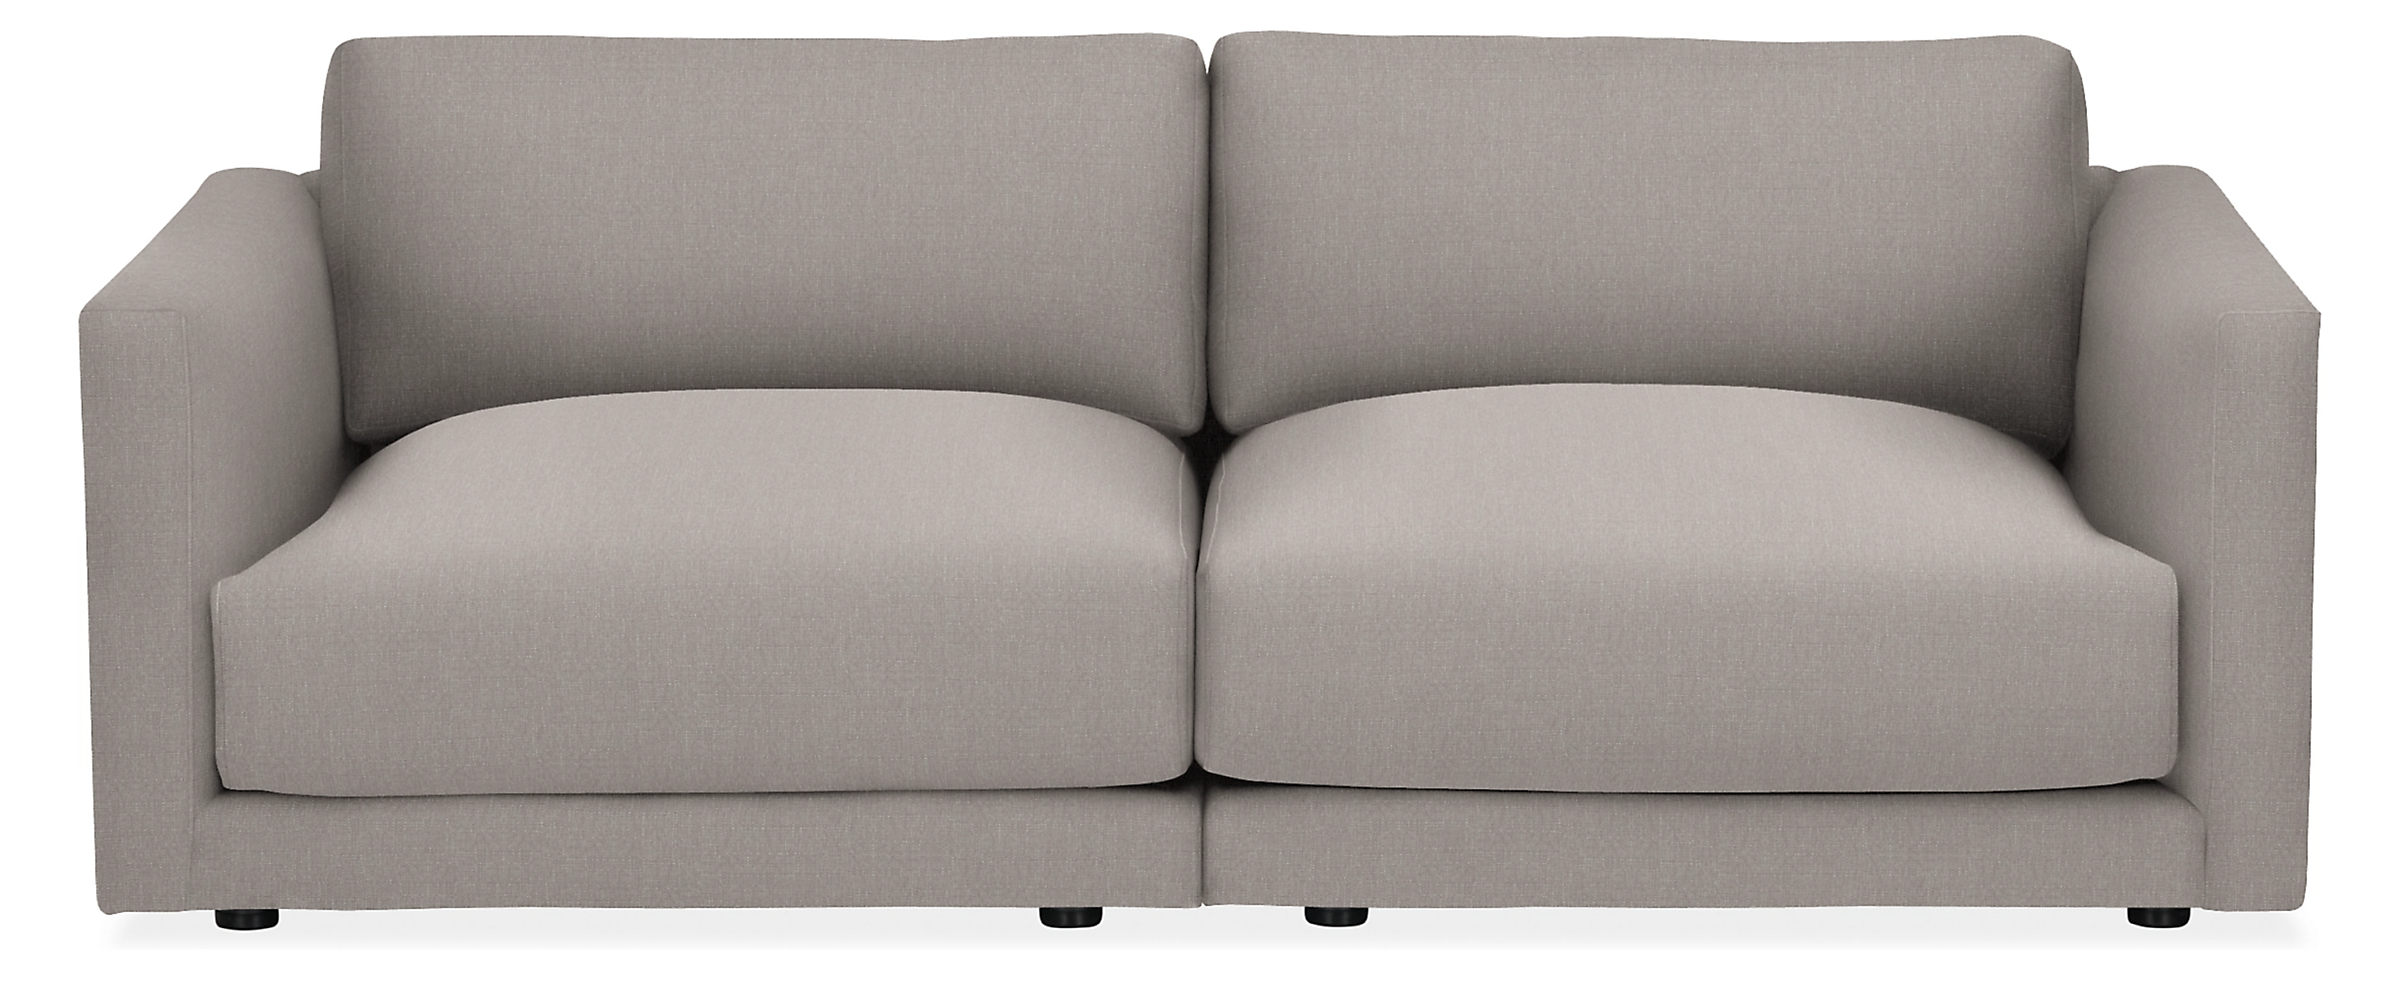 Clemens 74" Two-Piece Modular Sofa in Hines Grey